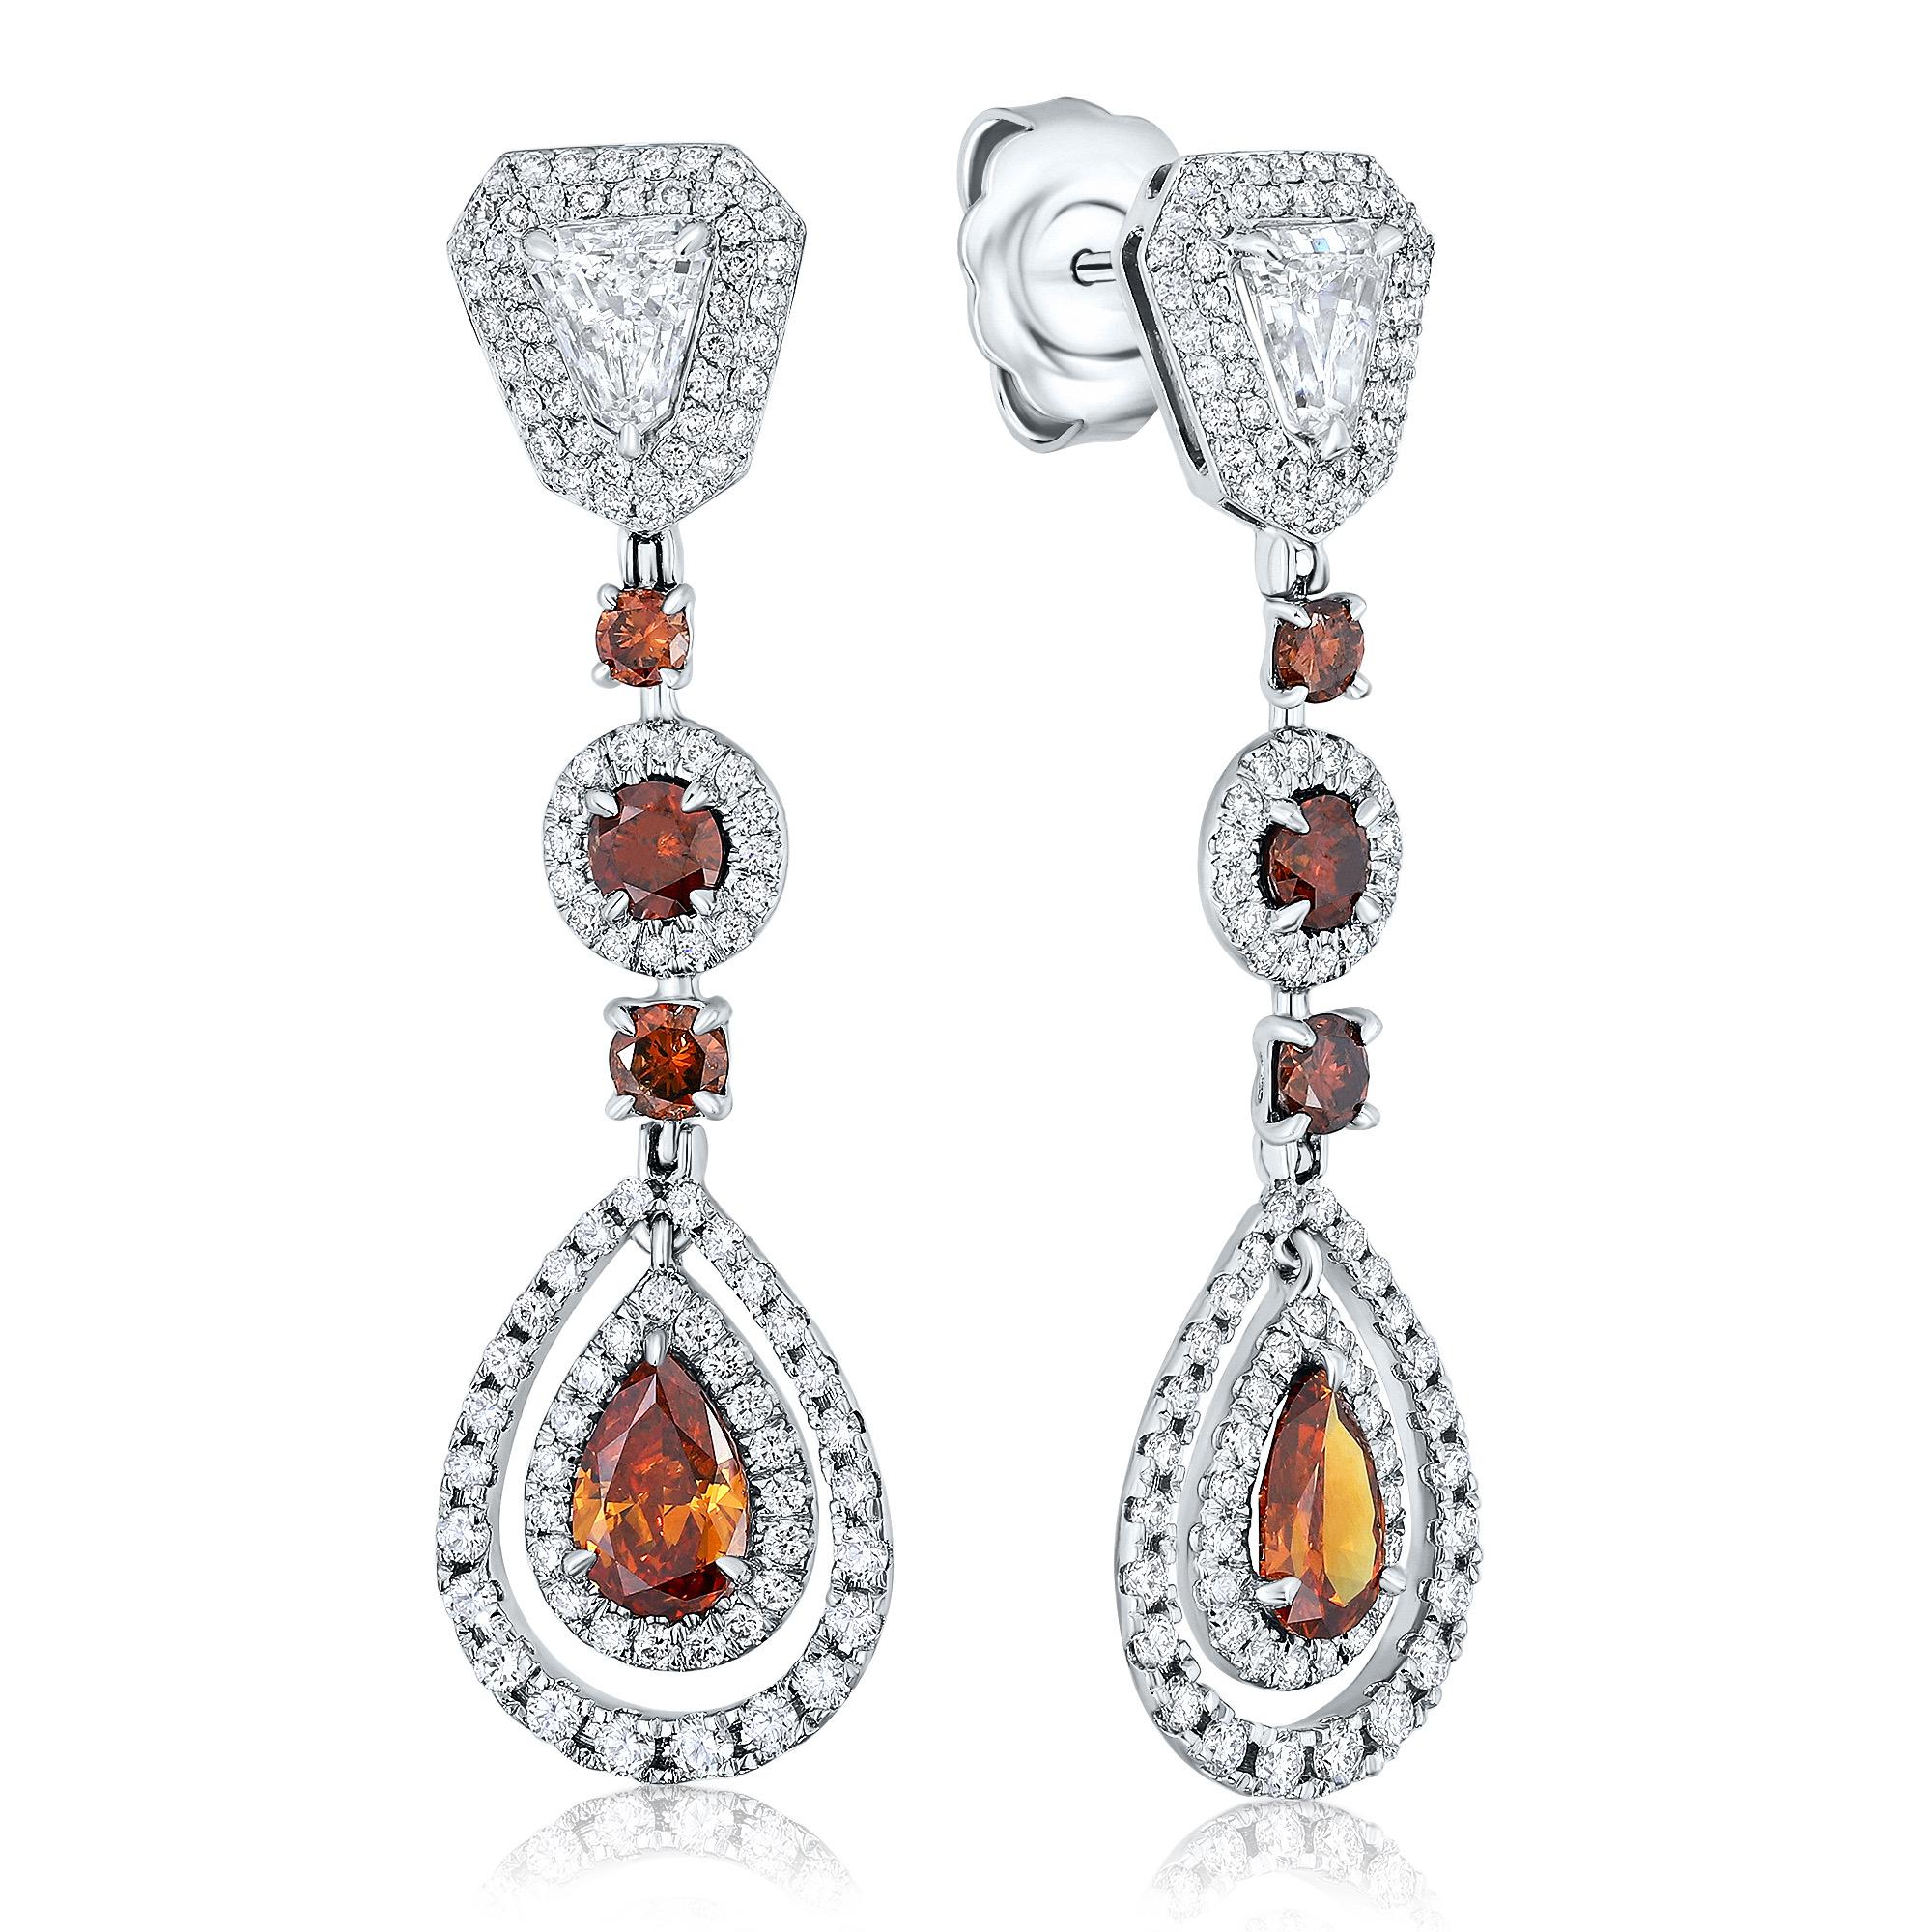 Introducing a stunning pair of teardrop diamond earrings that are sure to make a statement. These earrings feature a vibrant mix of eight brown diamonds, weighing approximately 2.32 carats, along with two shield-cut white diamonds weighing 1.21